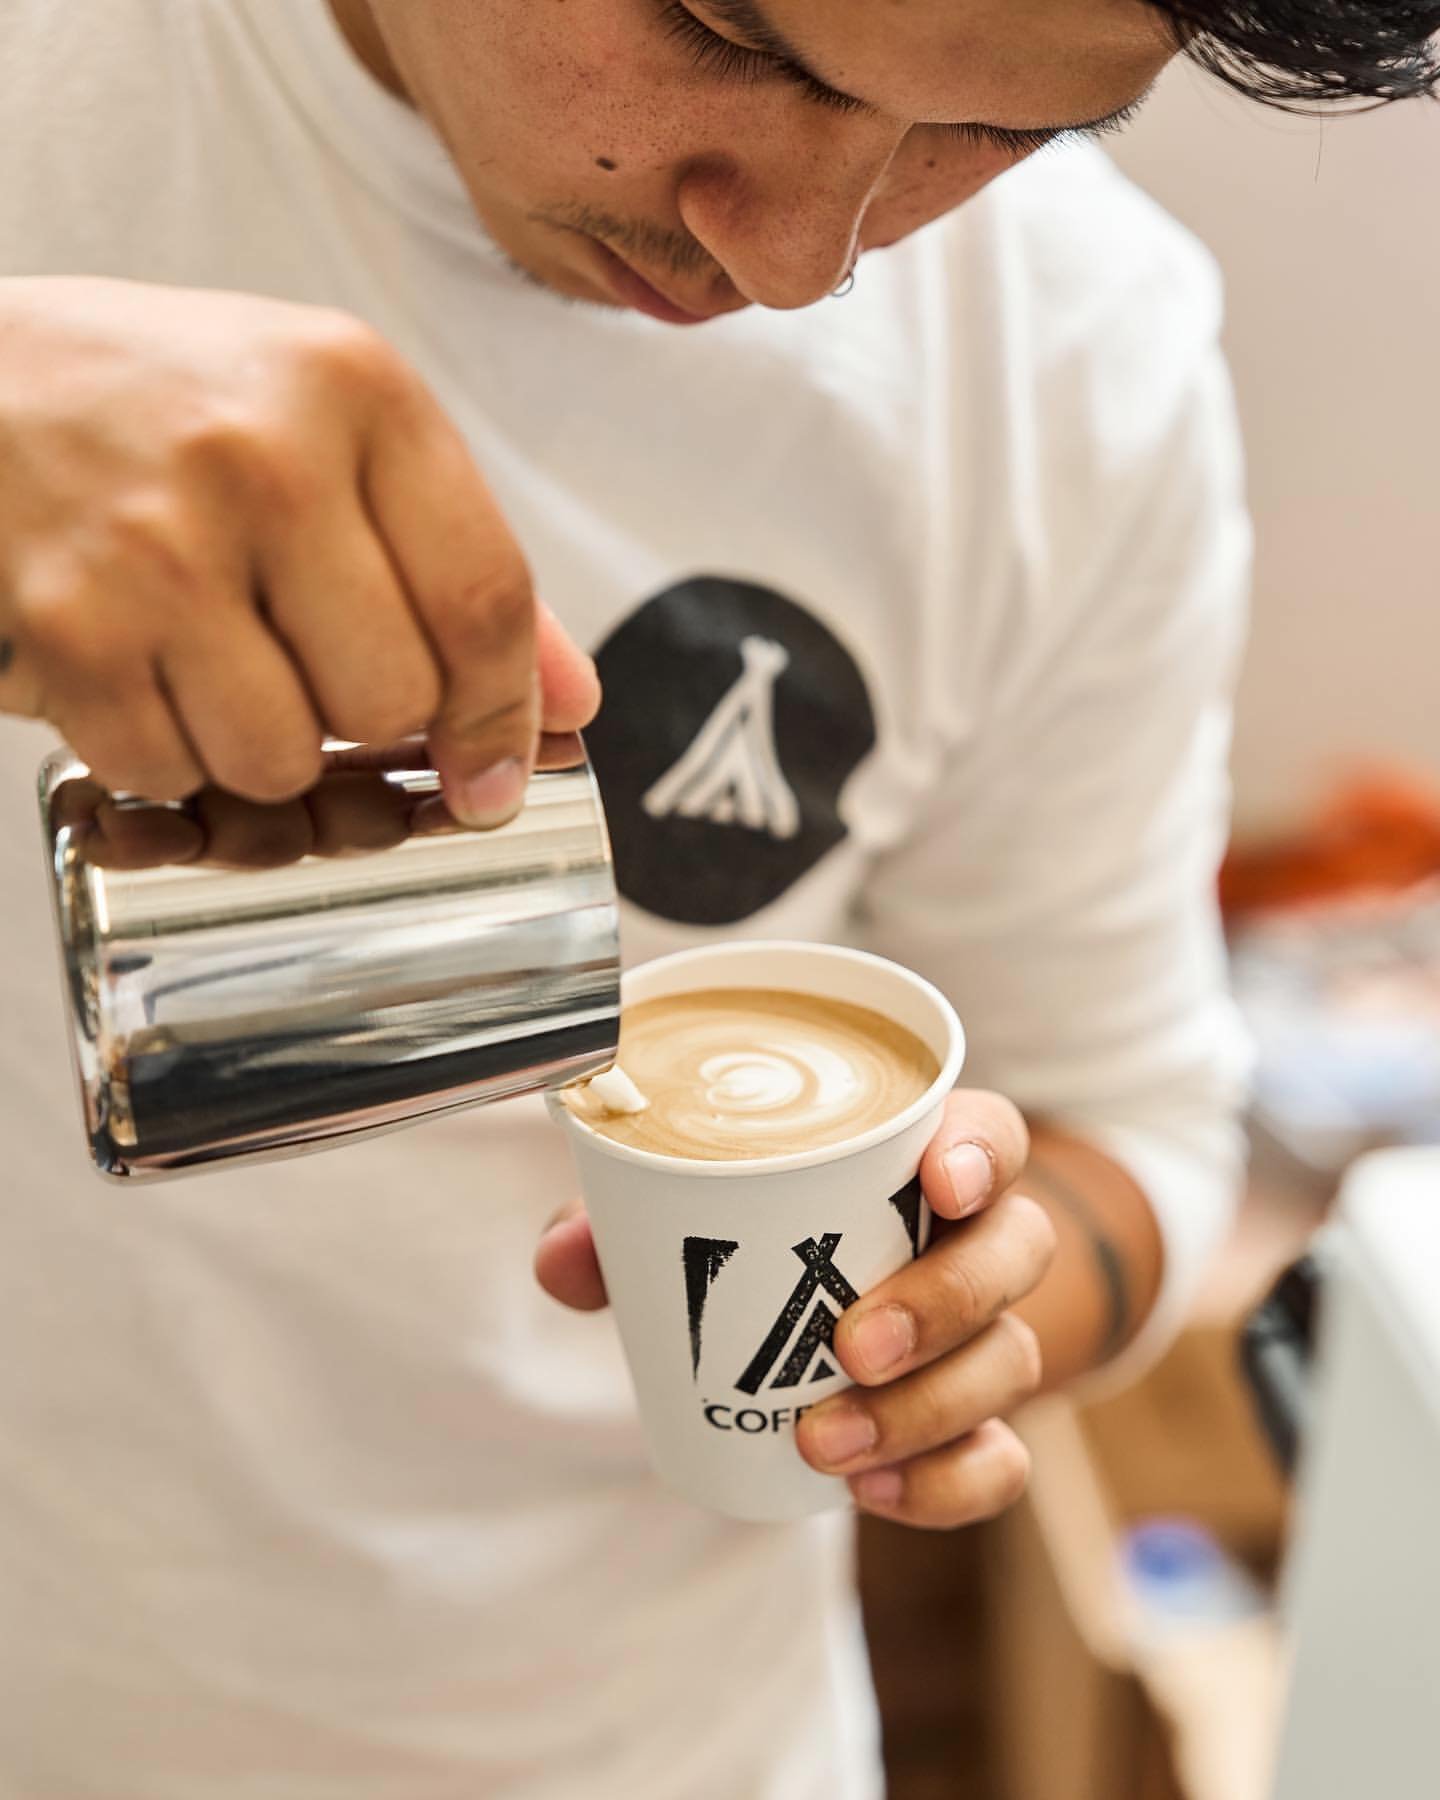 We're excited to host @coffeetab_seattle this evening during the @belltownartwalk! They're a nonprofit with a barista training program right here in Belltown. Stop by Slip and get their full story and a delicious coffee drink! #coffee #beansforacause